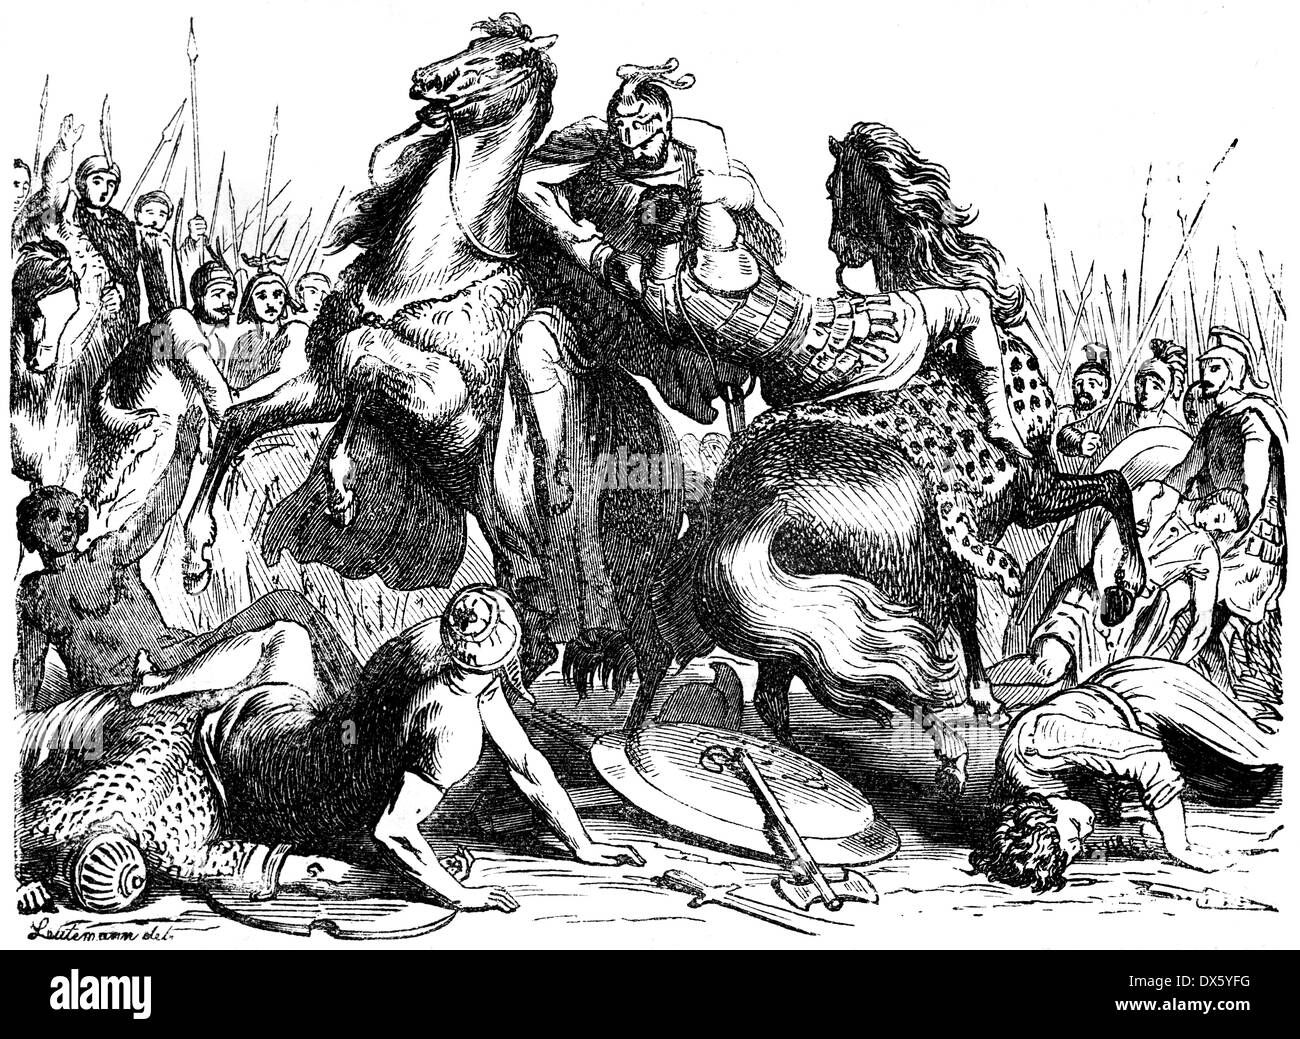 Fight of Eumenes and Neoptolemus, illustration from book dated 1878 Stock Photo